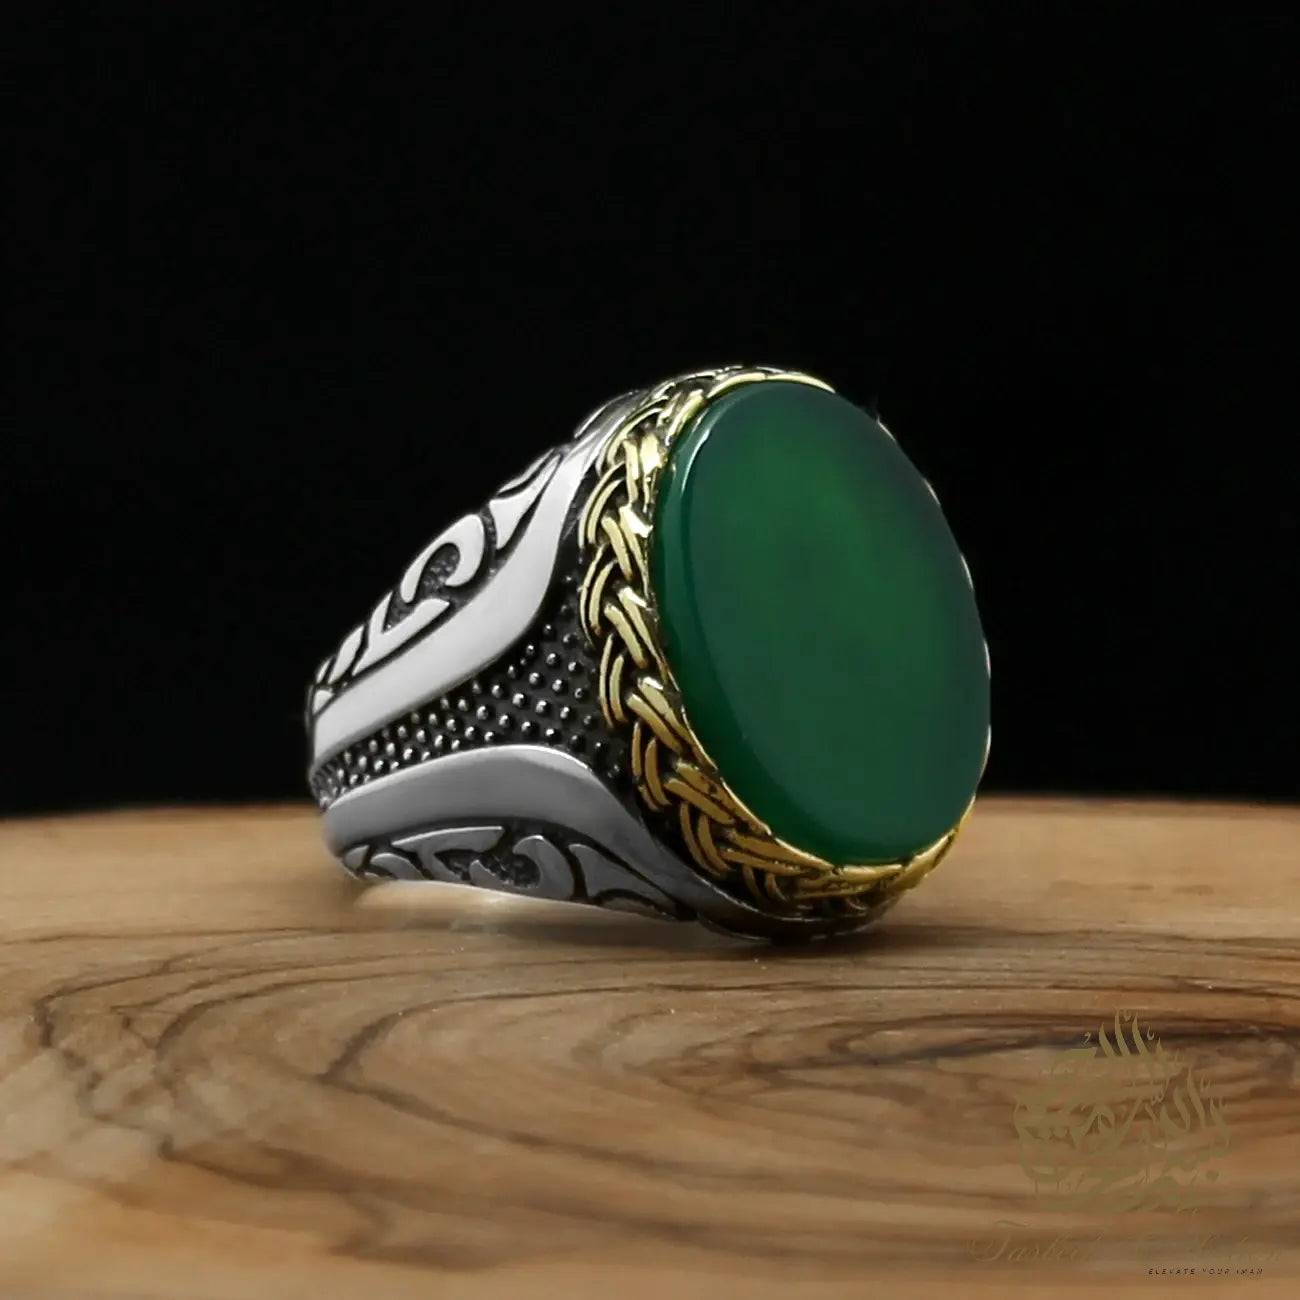 Hand Made 925 Carat Sterling Silver with Choice of Tiger Eye, Black Onyx, Green or Red Agate